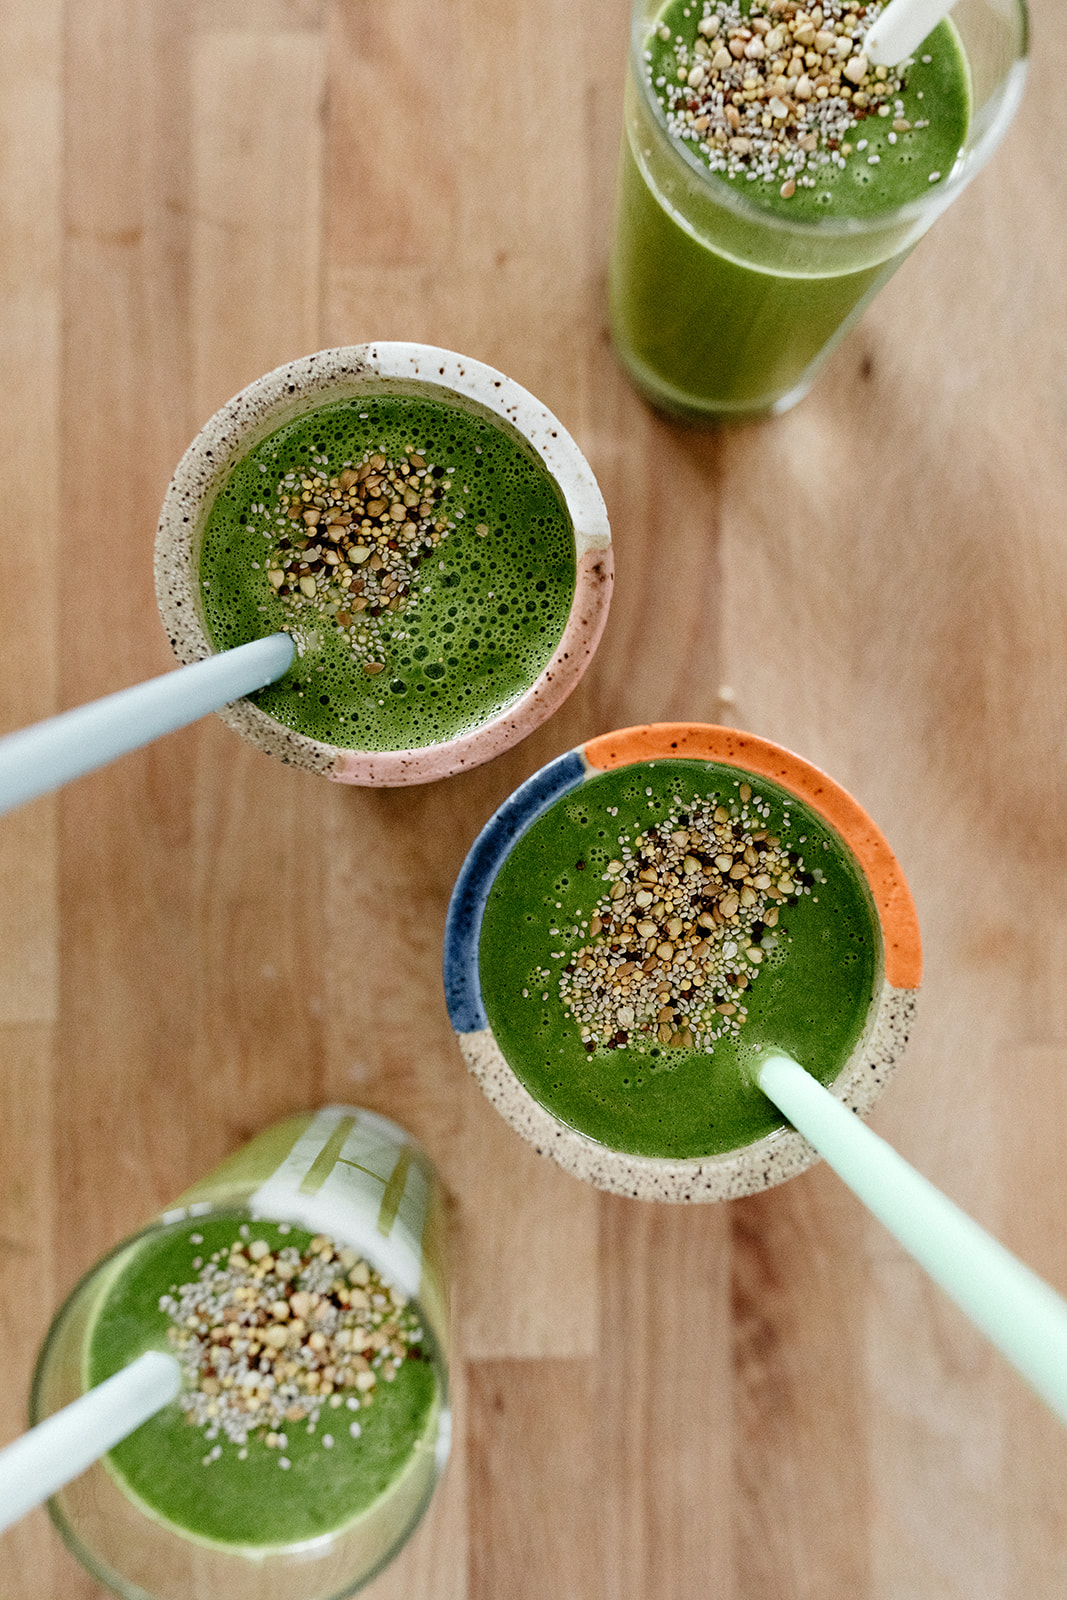 1-10-19-molly-yeh-green-smoothie-3.jpg